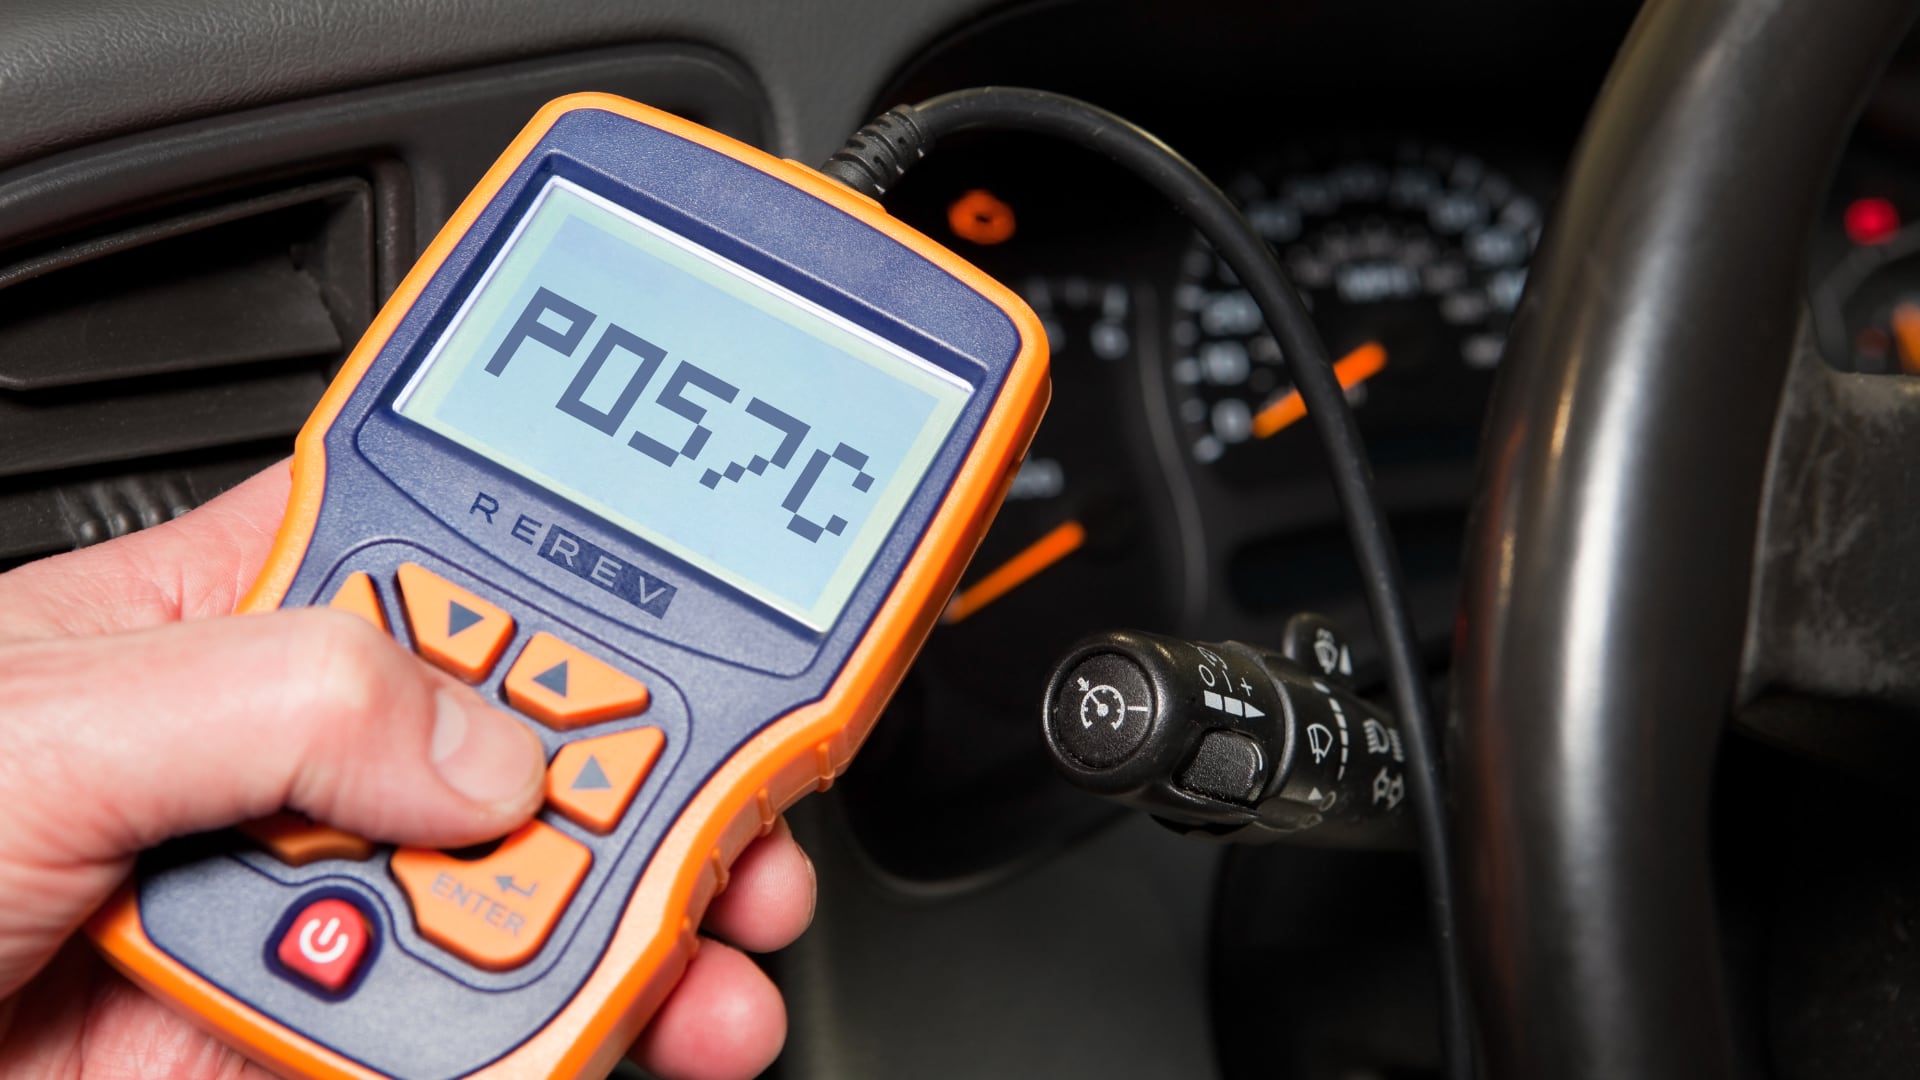 A person is holding a postimeter on the steering wheel of a car.